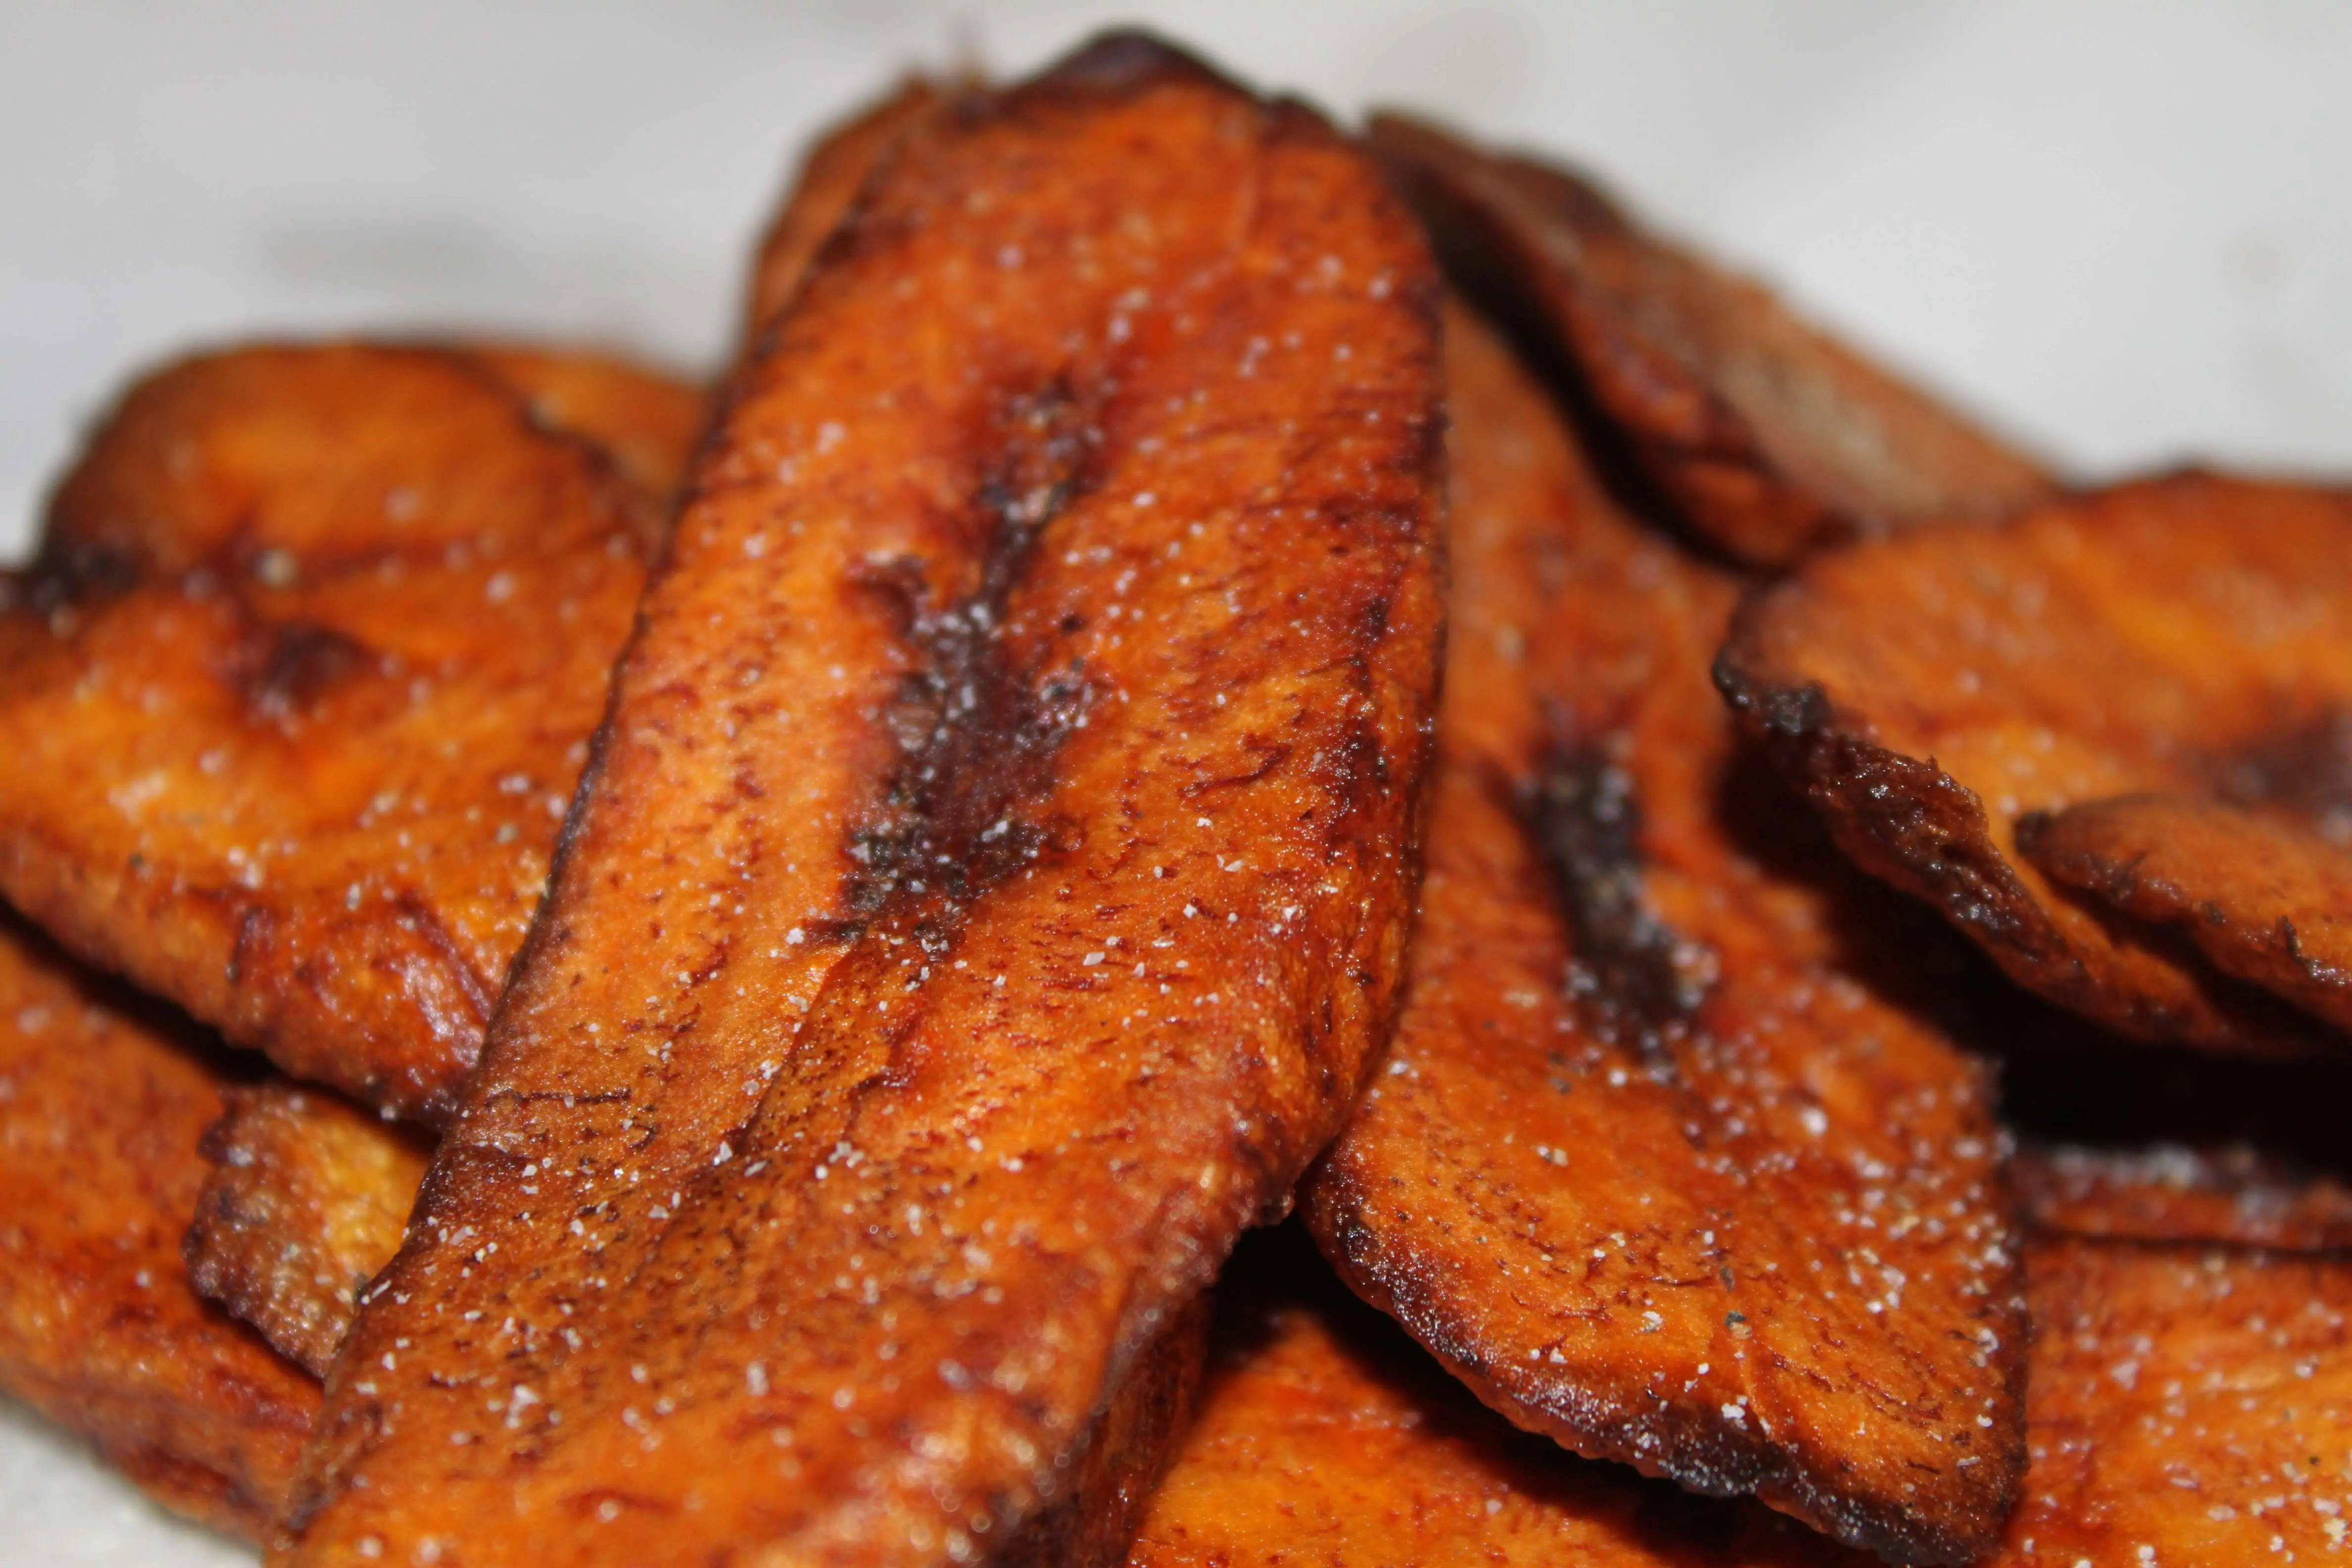 Cooking with Cannabis: “Fried Plantain”